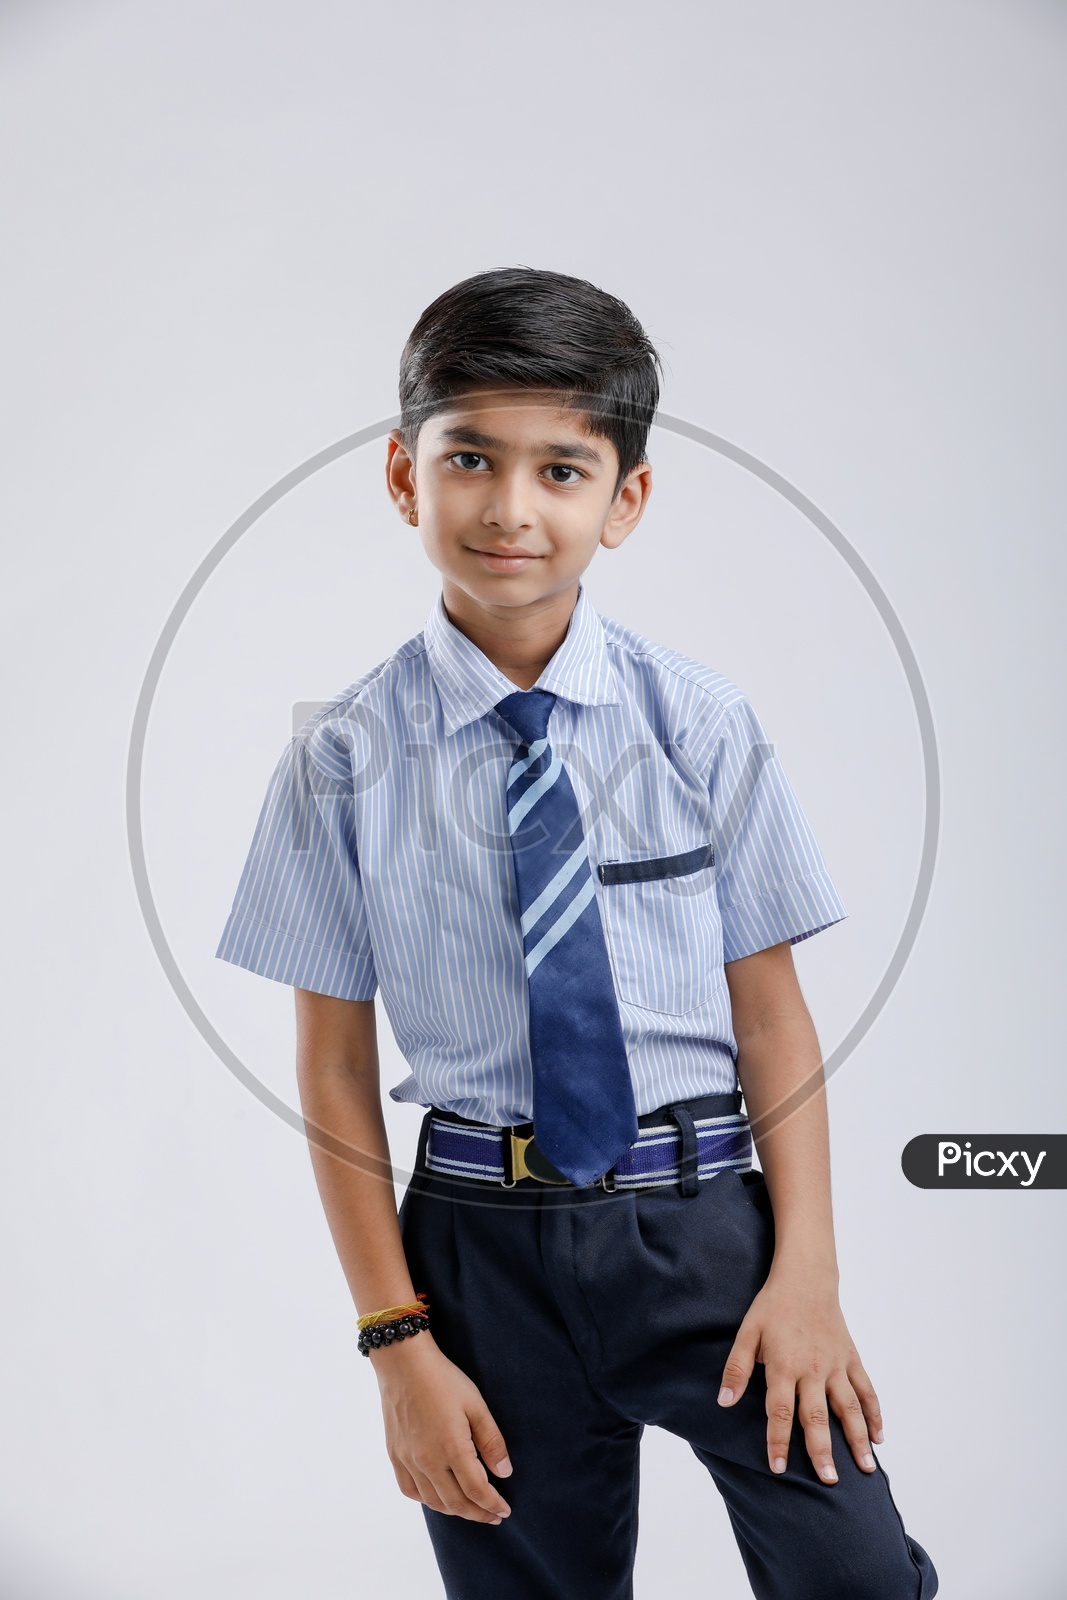 Indian Or Asian Boy Or Kid Or student in School Uniform  And  Posing  Over an Isolated White Background